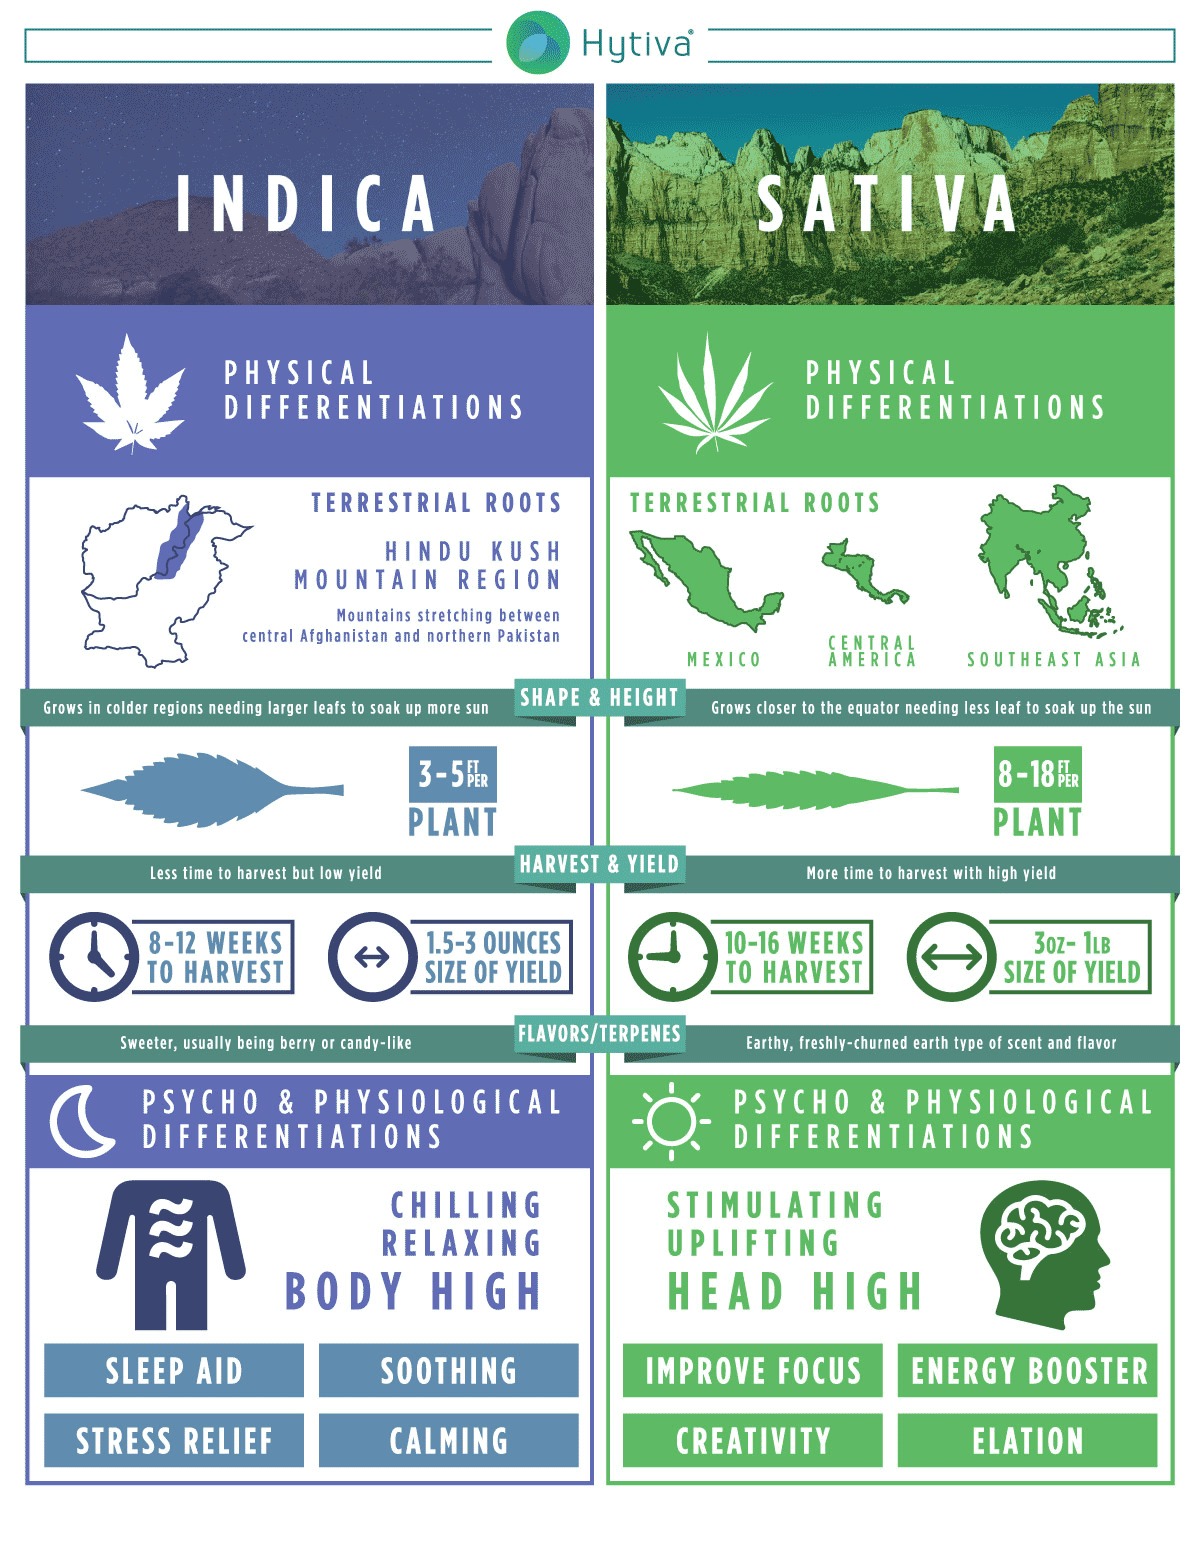 Physical, Psycho, and Physiological differentiations between Indica and Sativa Cannabis